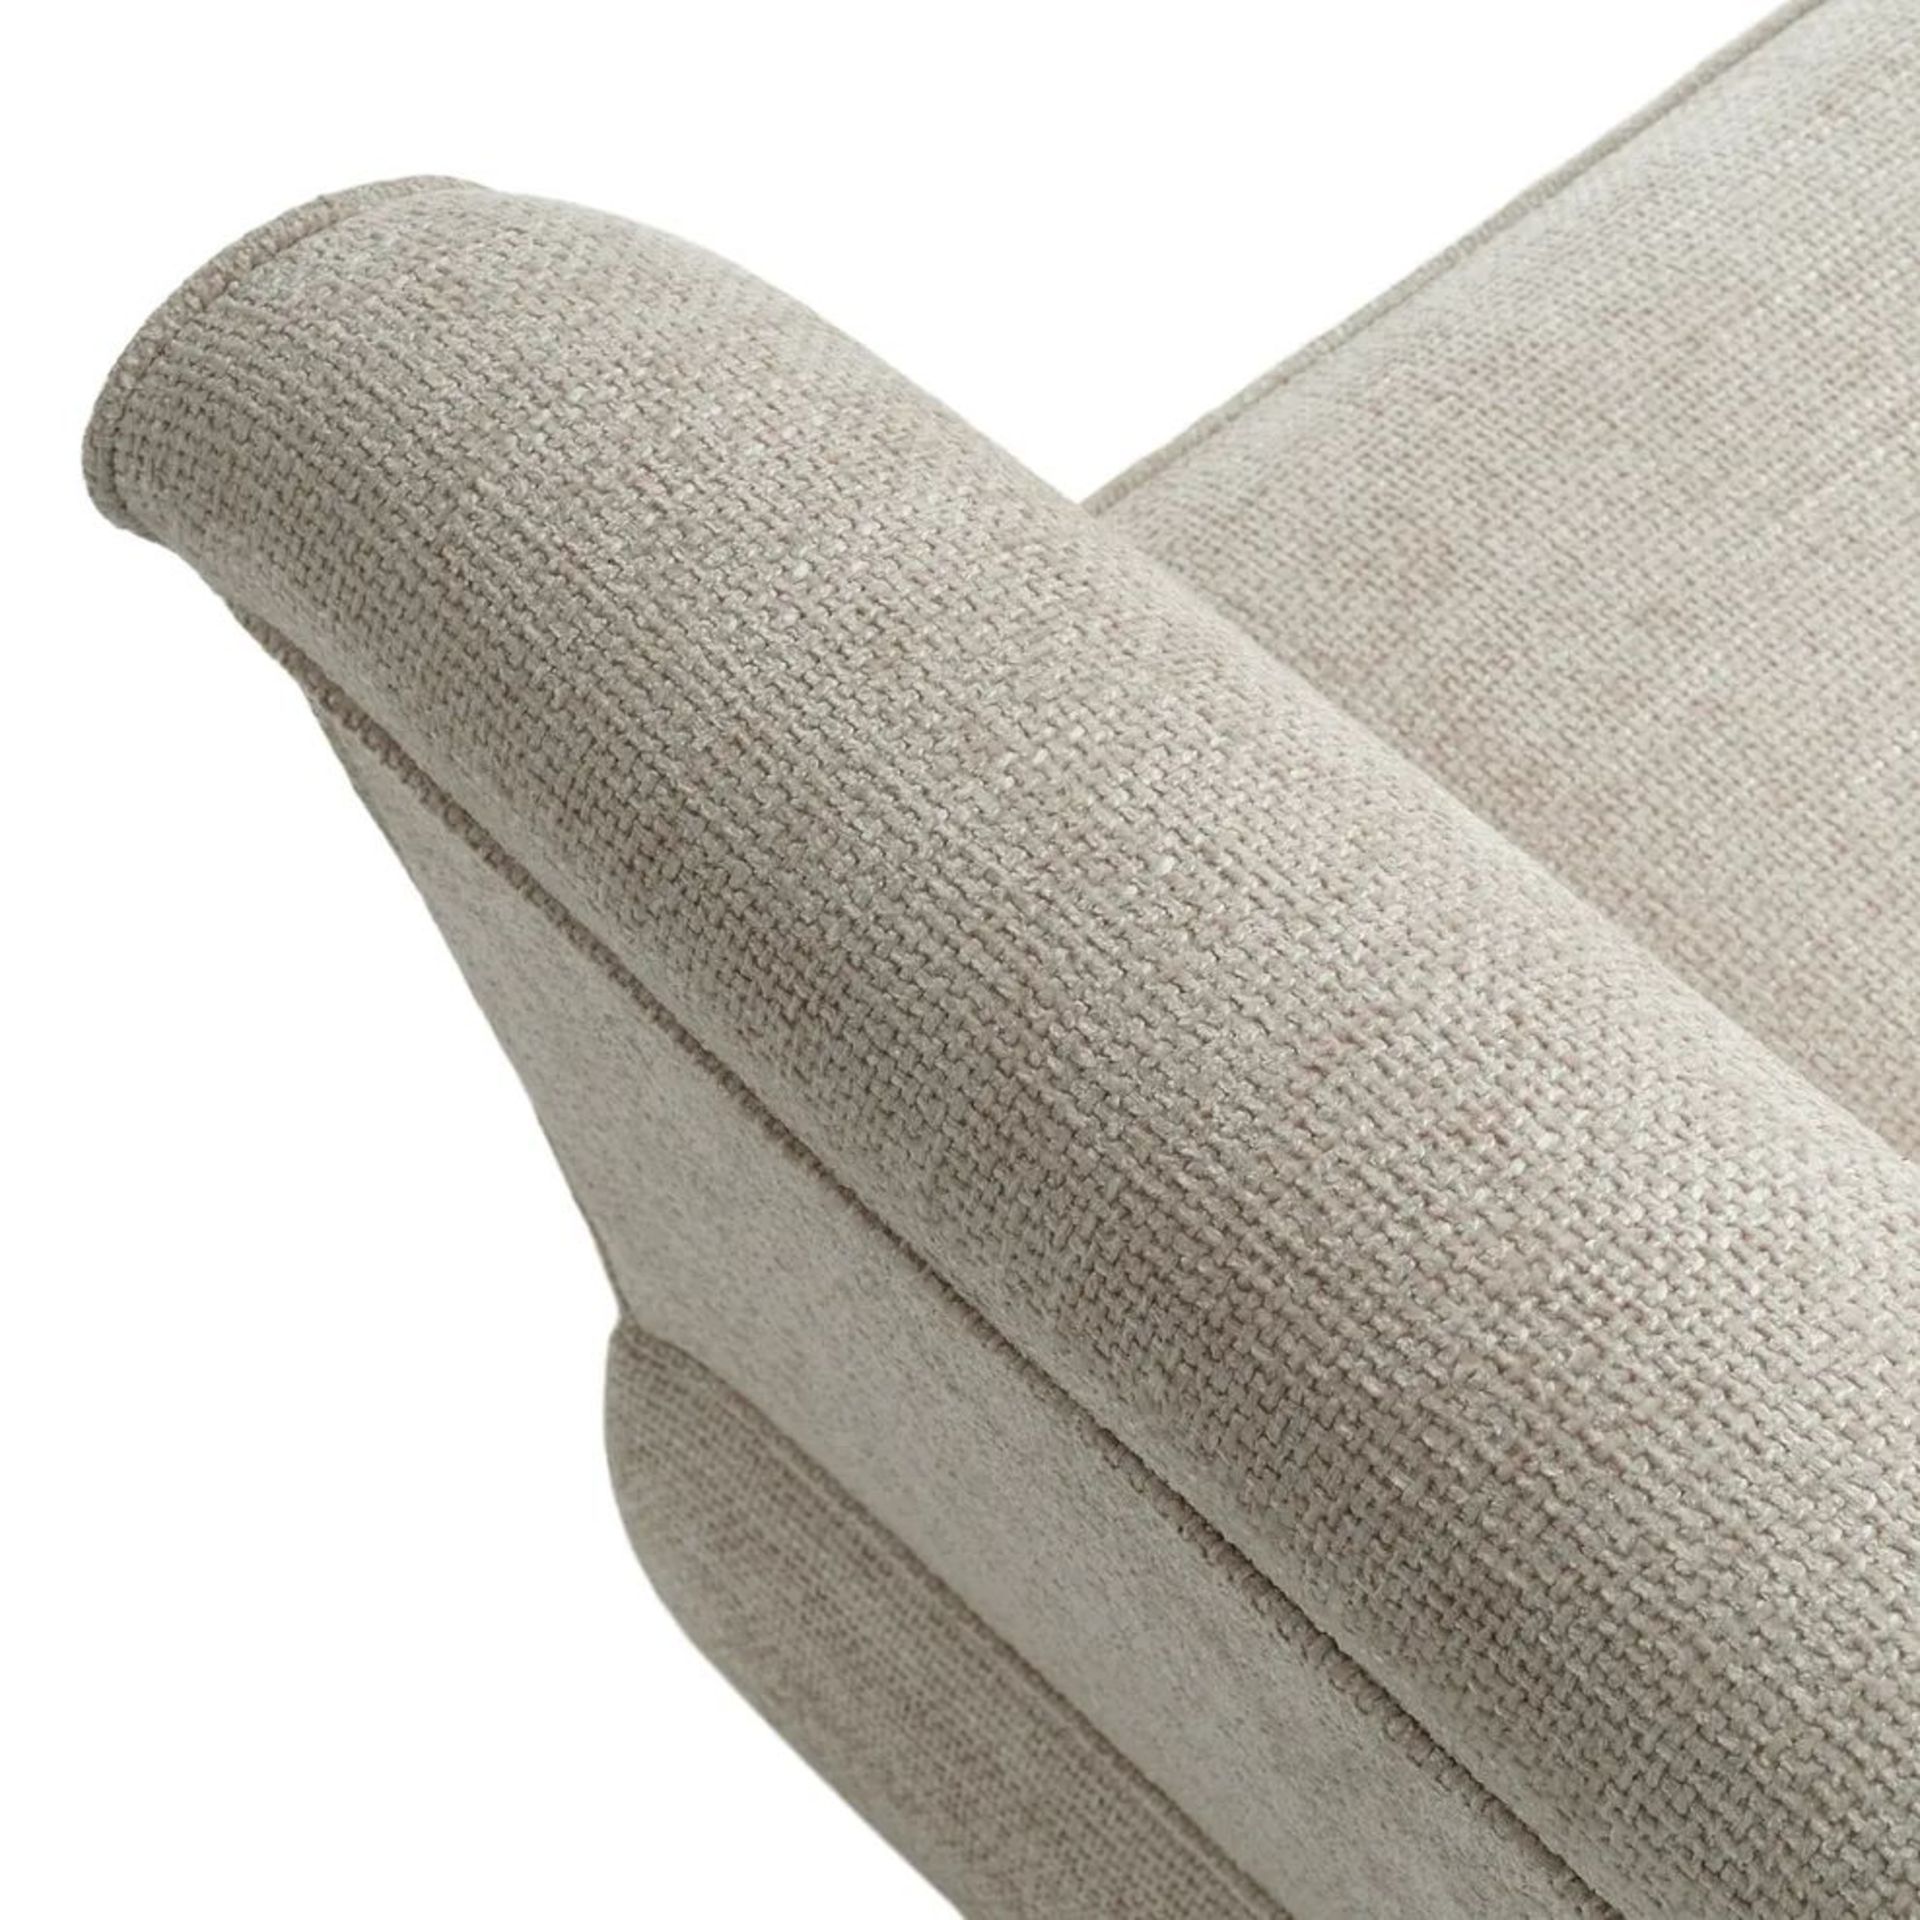 BRAND NEW CARRINGTON 4 Seater Pillow Back Split Sofa - NATURAL FABRIC. RRP £1149. Bring a modern - Image 6 of 8